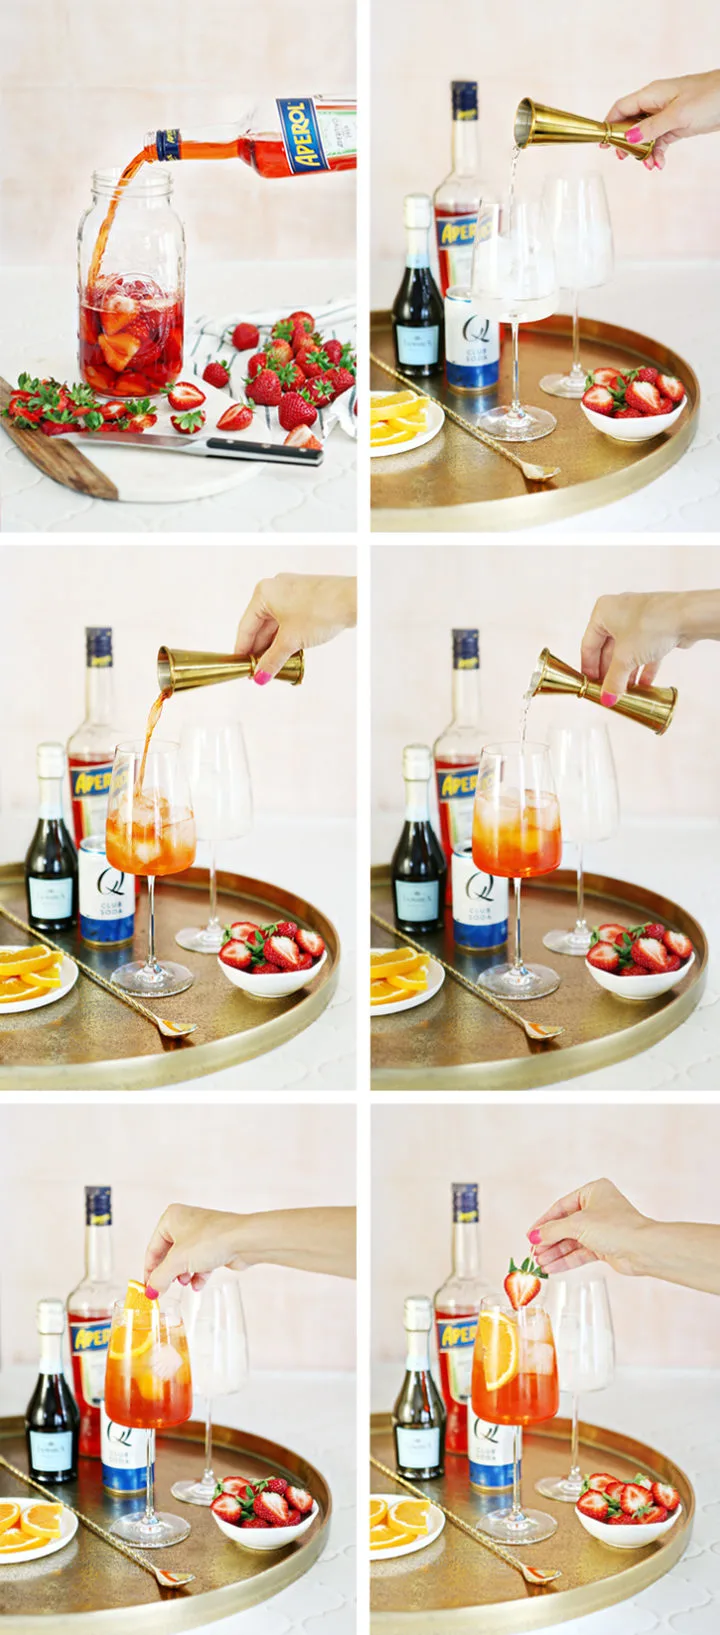 step by step photos showing how to make a strawberry aperol spritz